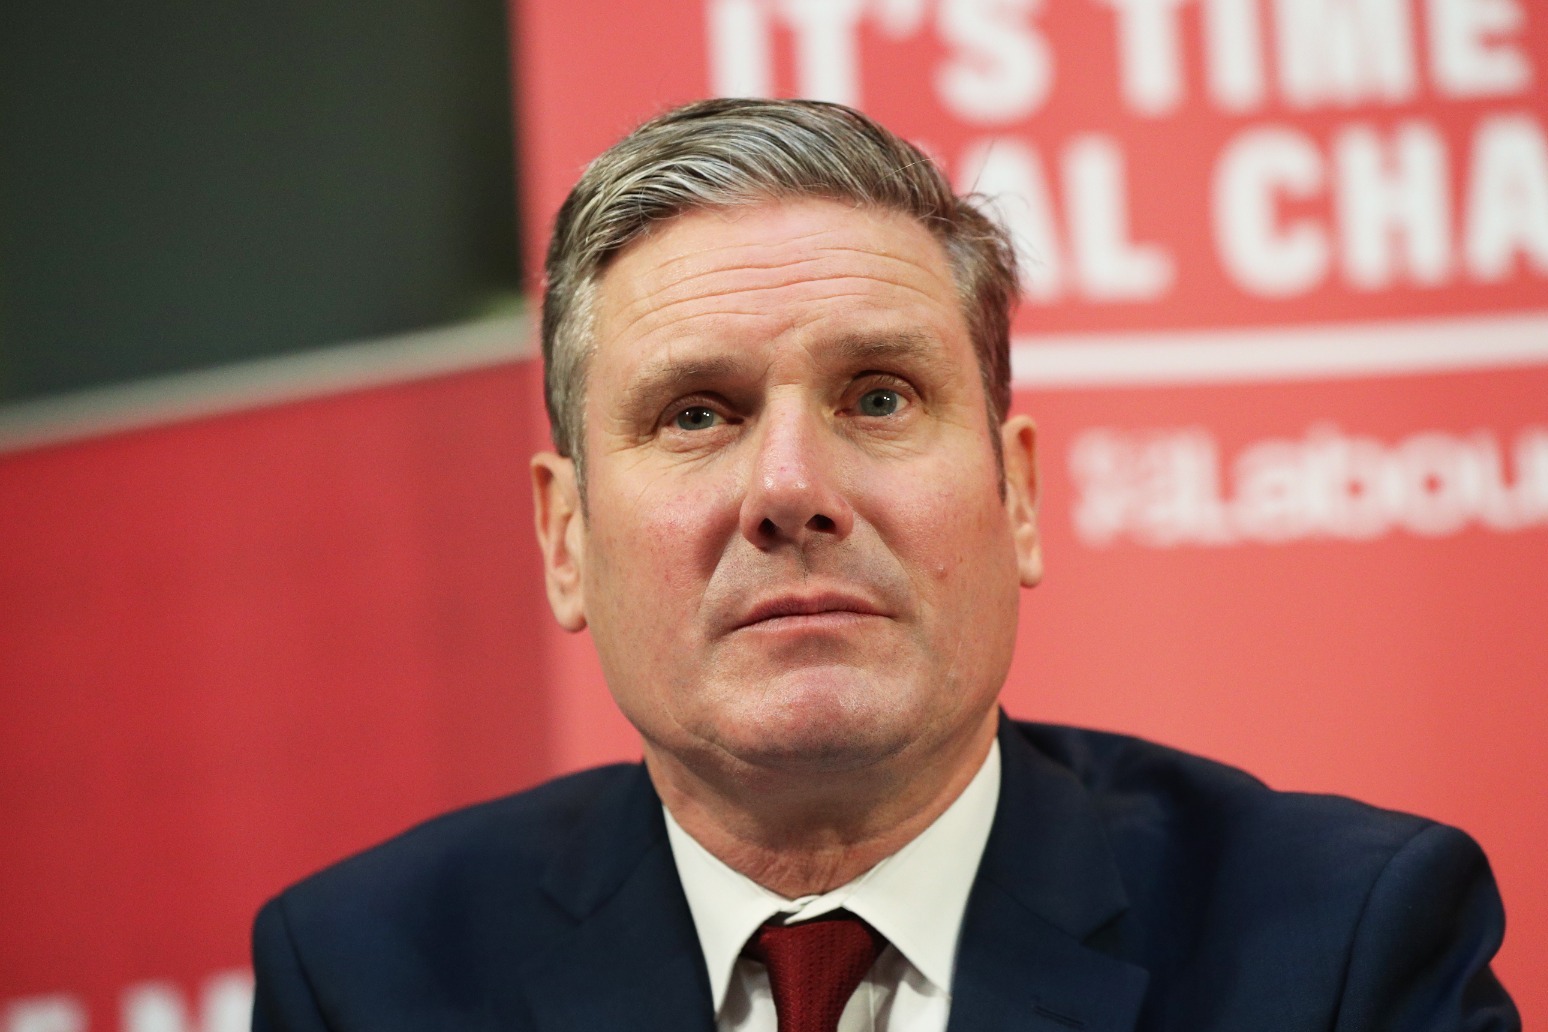 Make-or-break moment for Starmer at first in-person Labour conference since 2019 